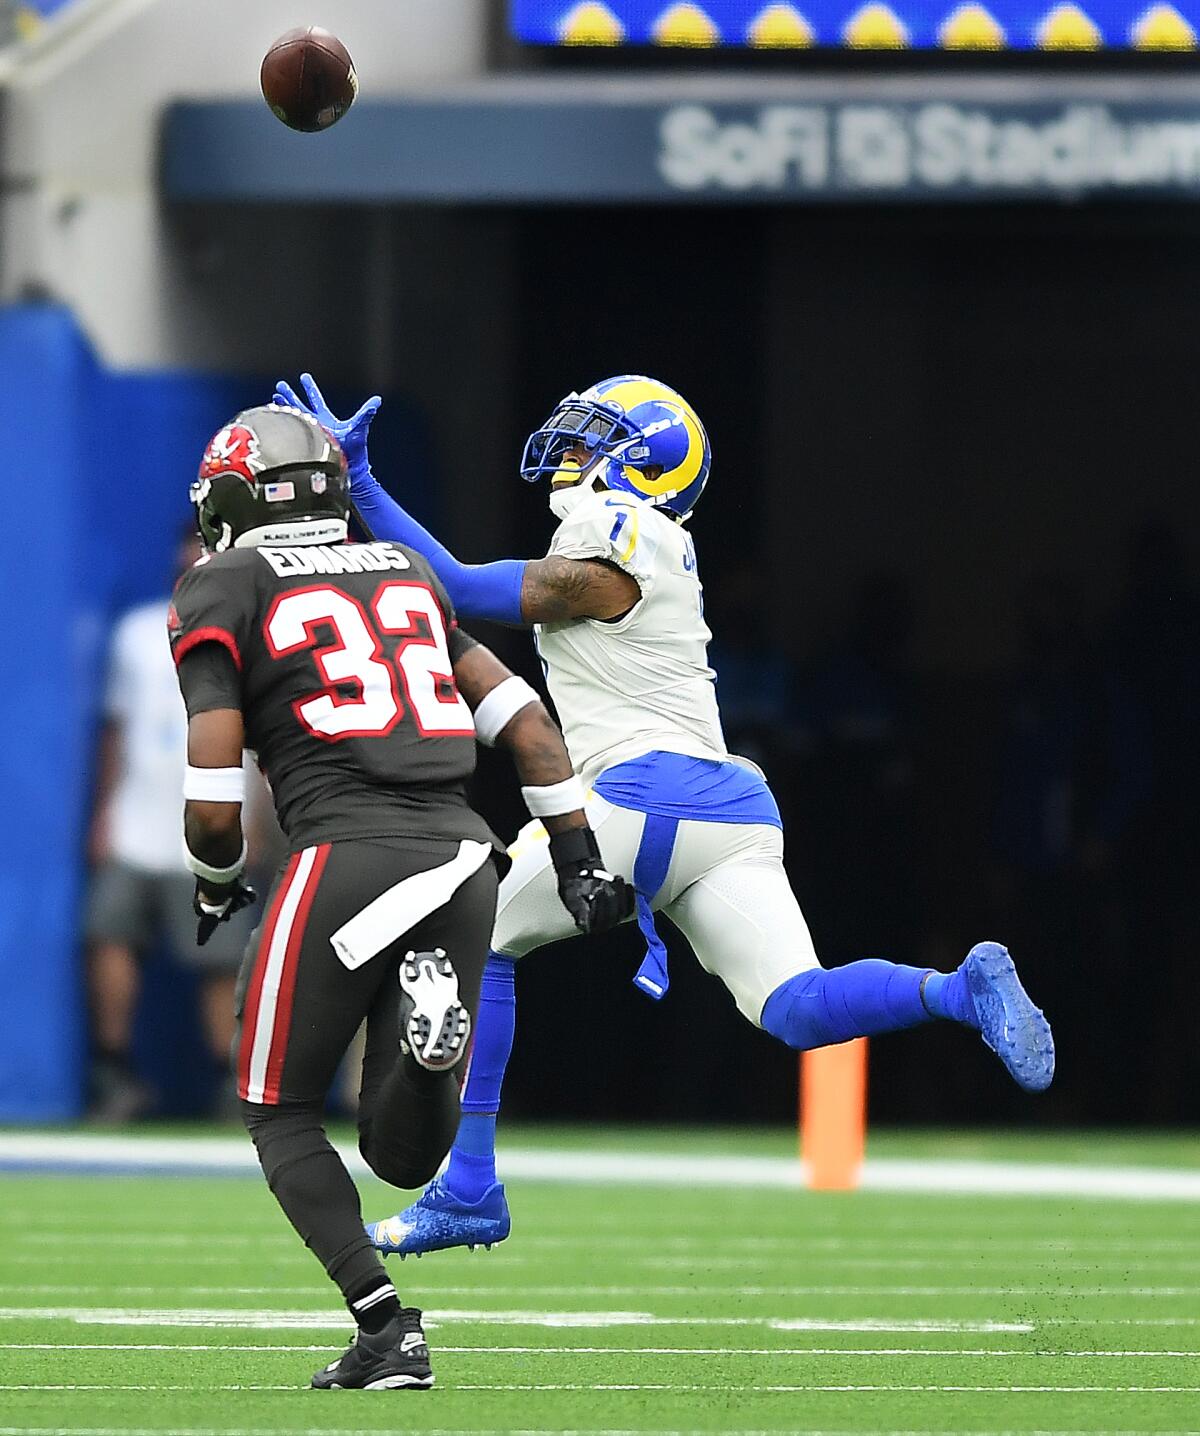 Rams receiver DeSean Jackson catches a 75-yard touchdown pass behind Bucaneers safety Mike Edwards.